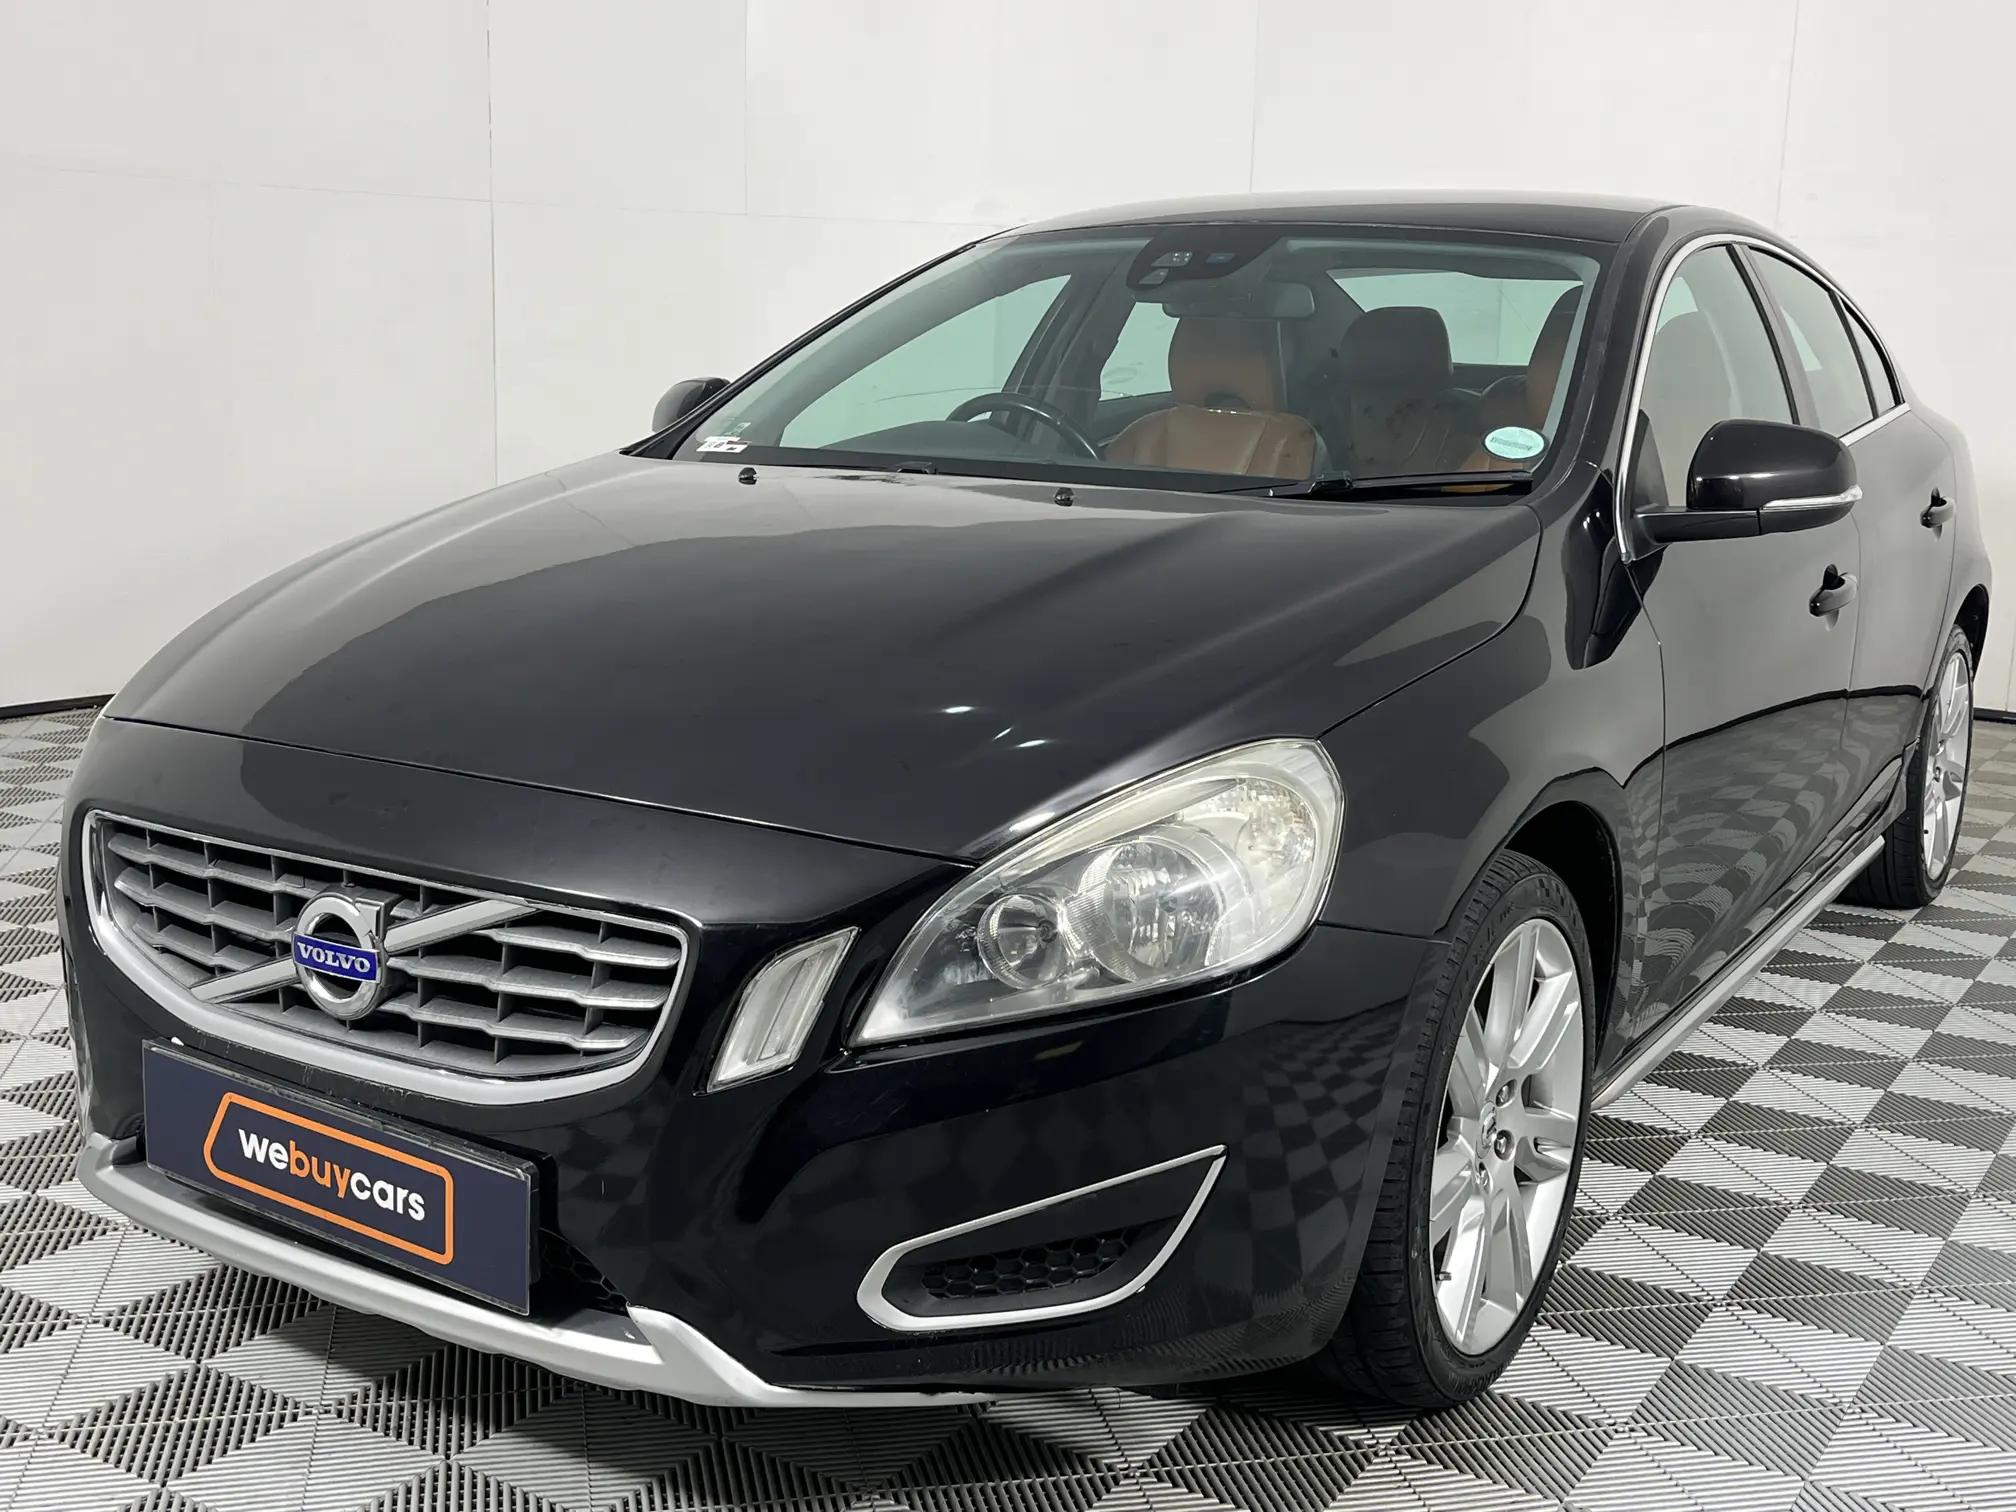 2010 Volvo S60 D5 Geartronic